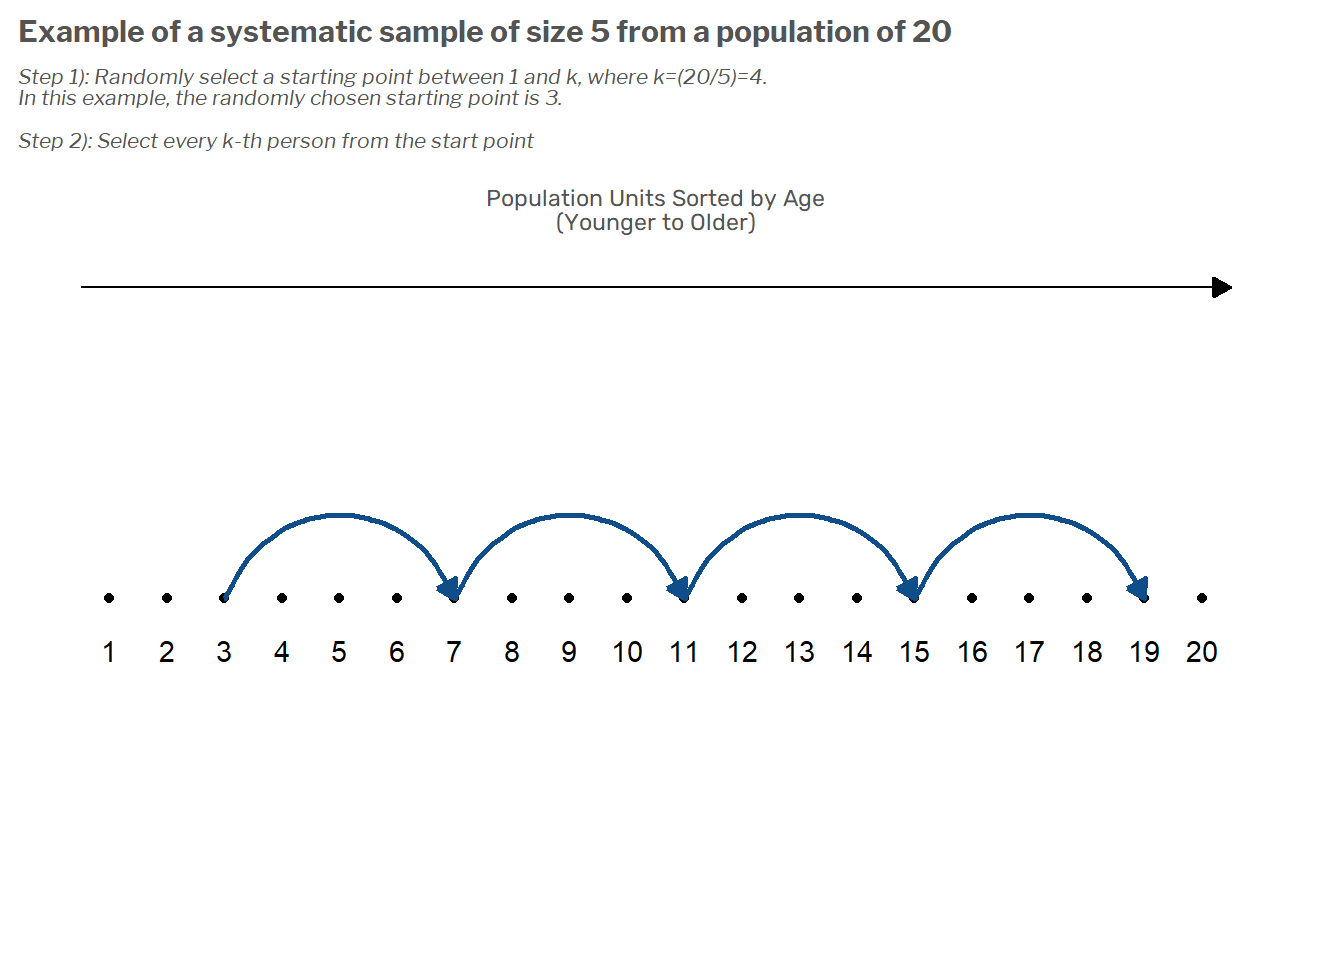 The figure is a sequence of 20 dots numbered 1 through 20, each dot representing a member of the population, which has been sorted by age from youngest to oldest. A series of arrows connect dots 3 and 7, 7 and 11, 11 and 15, and 15 and 19. The connected dots are an example of a sample selected using systematic sampling.